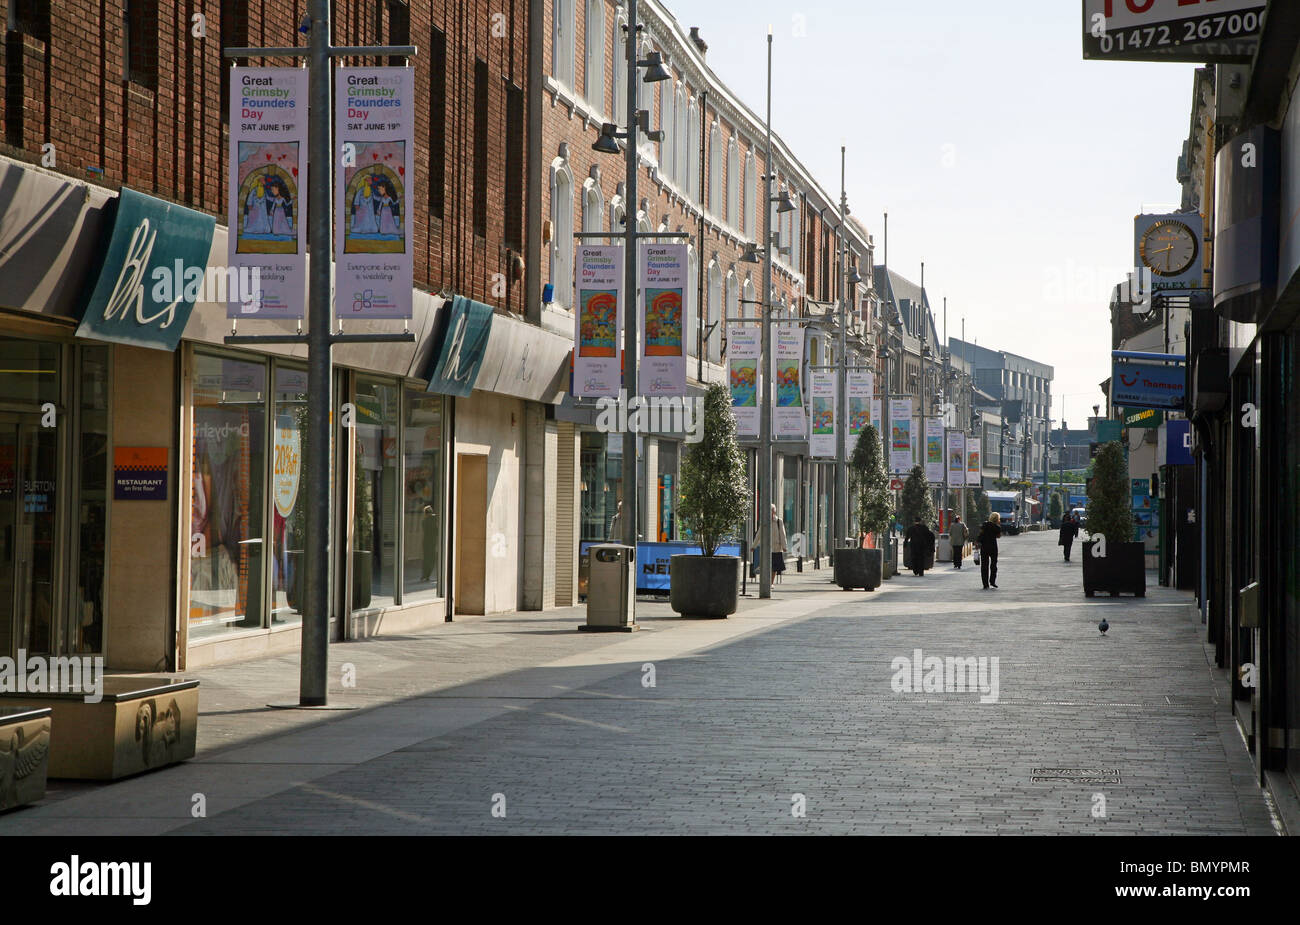 Shops in Grimsby town centre Stock Photo